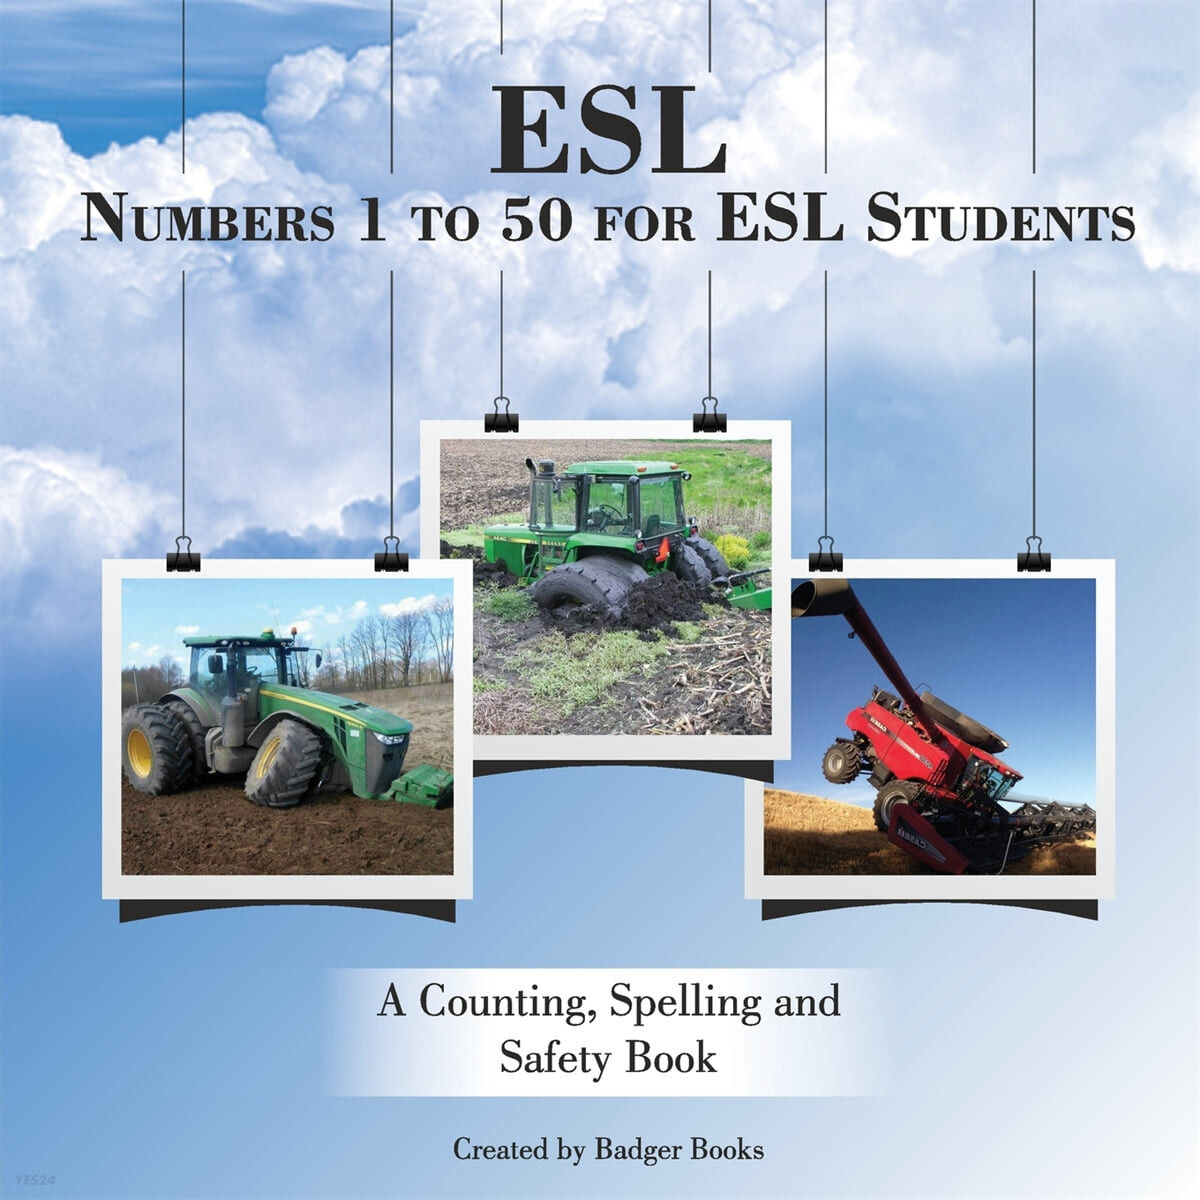 ESL Numbers 1 to 50 for ESL Students (A Counting, Spelling and Safety Book)